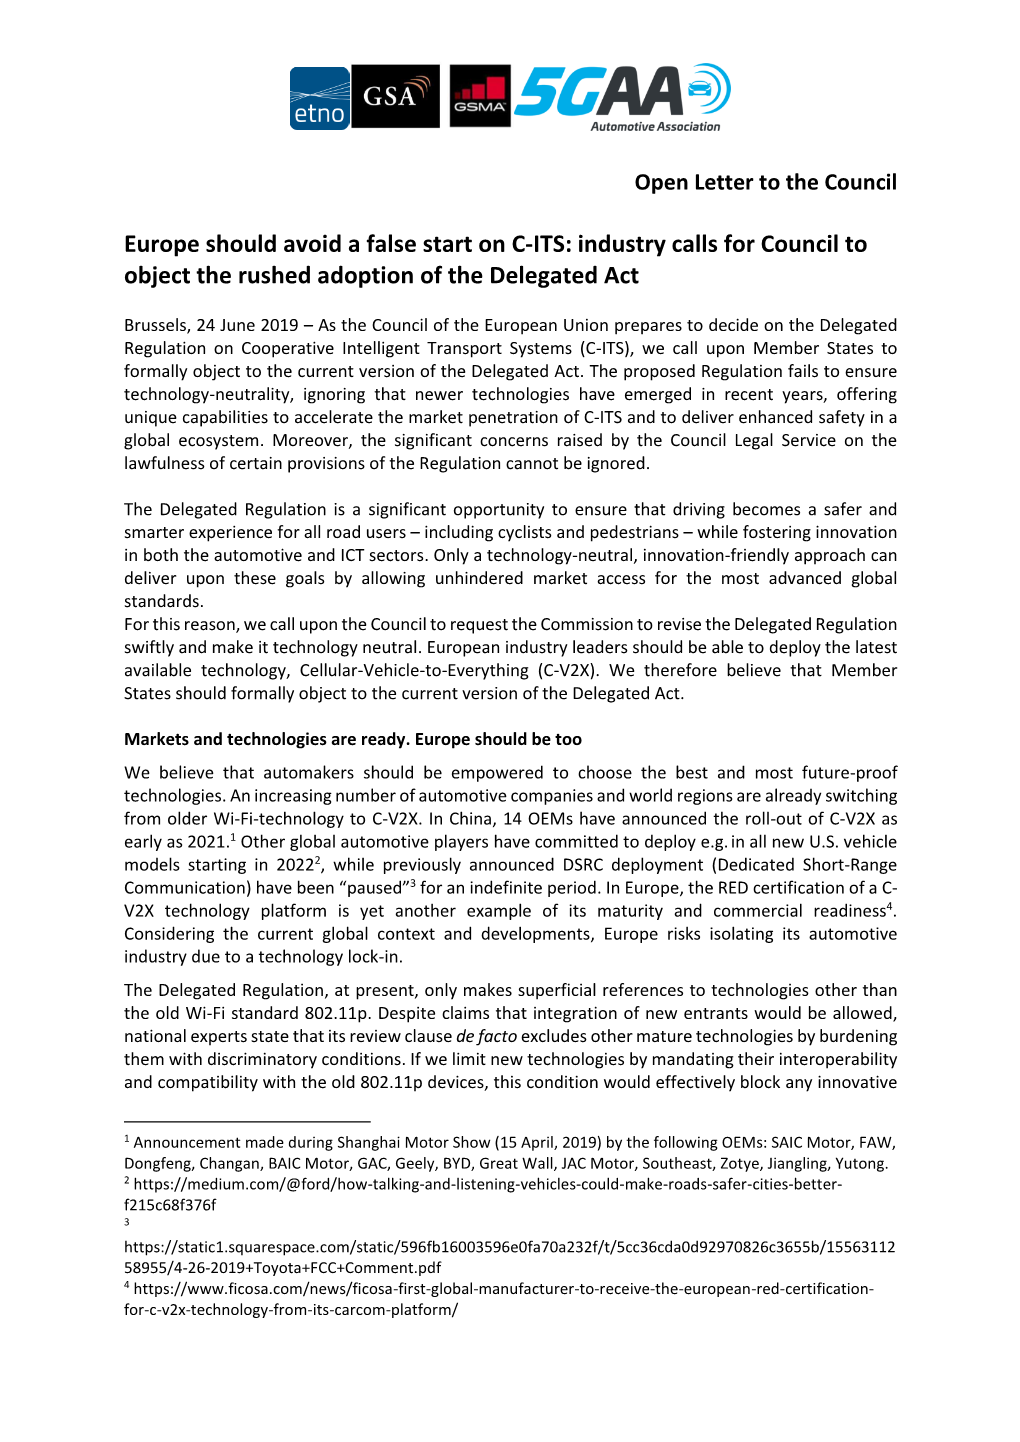 Europe Should Avoid a False Start on C-ITS: Industry Calls for Council to Object the Rushed Adoption of the Delegated Act